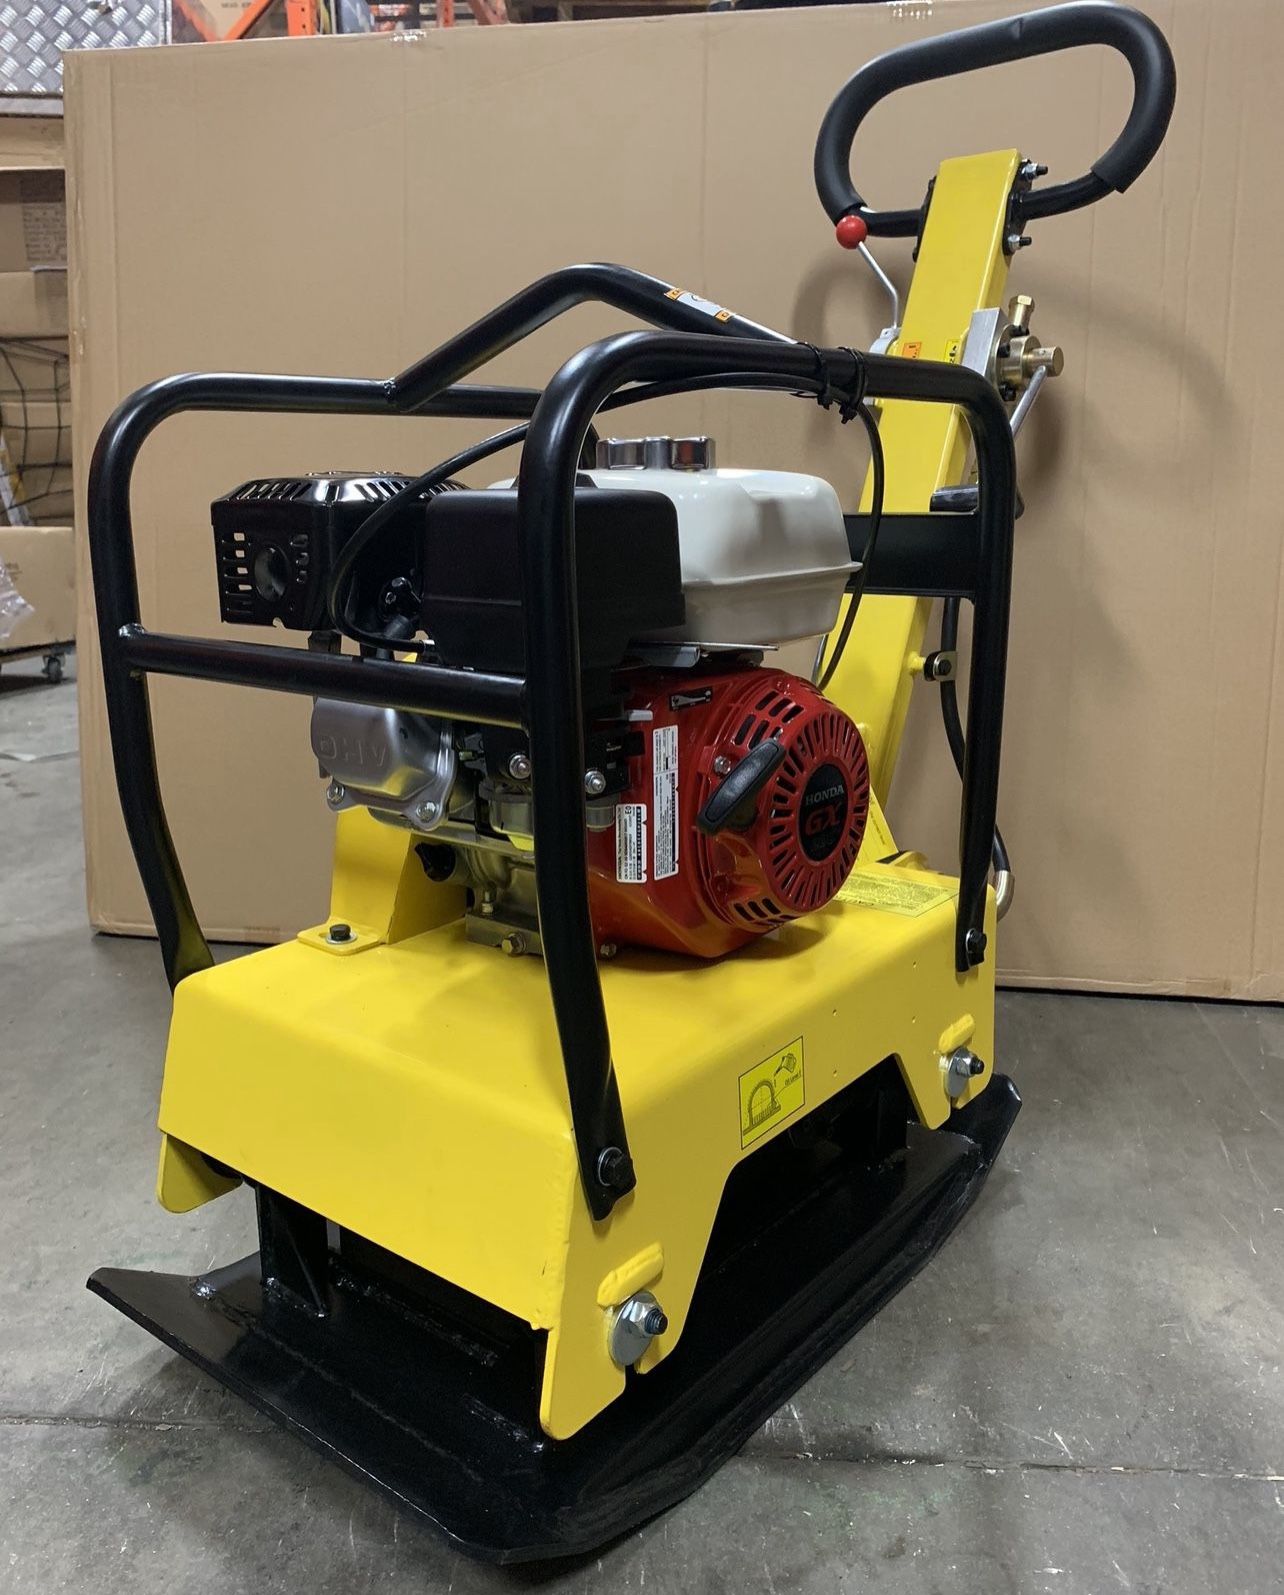 Reversible Plate Compactor With GX160 Honda Engine New  3 Years Warranty 1750.00